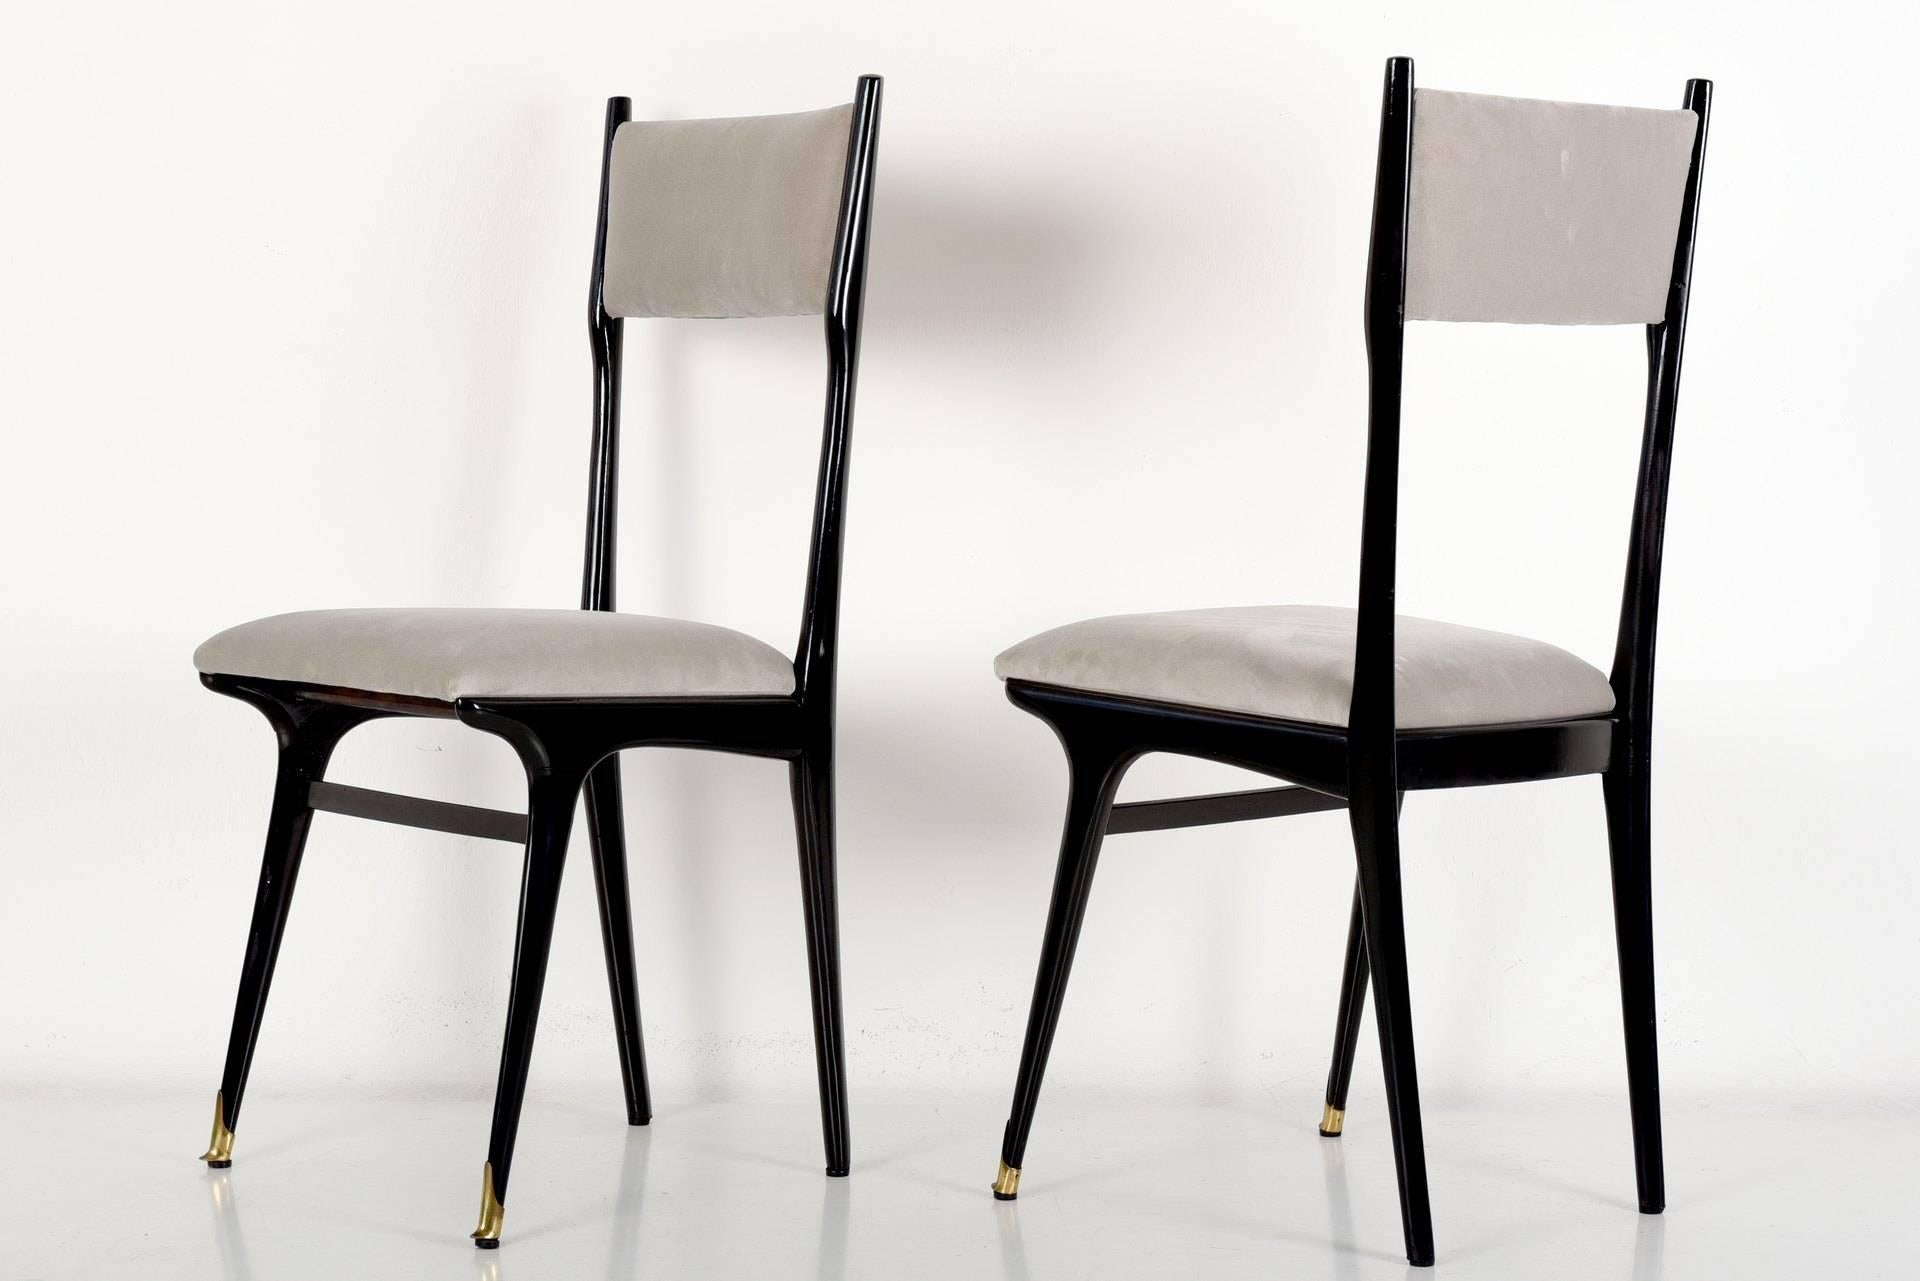 Organically rounded shapes characterize this set of chairs from the Italy of the 1950s. The high backrests, paired with the filigree substructure, give the chairs an extremely sculptural effect. The special character is also characterized by the